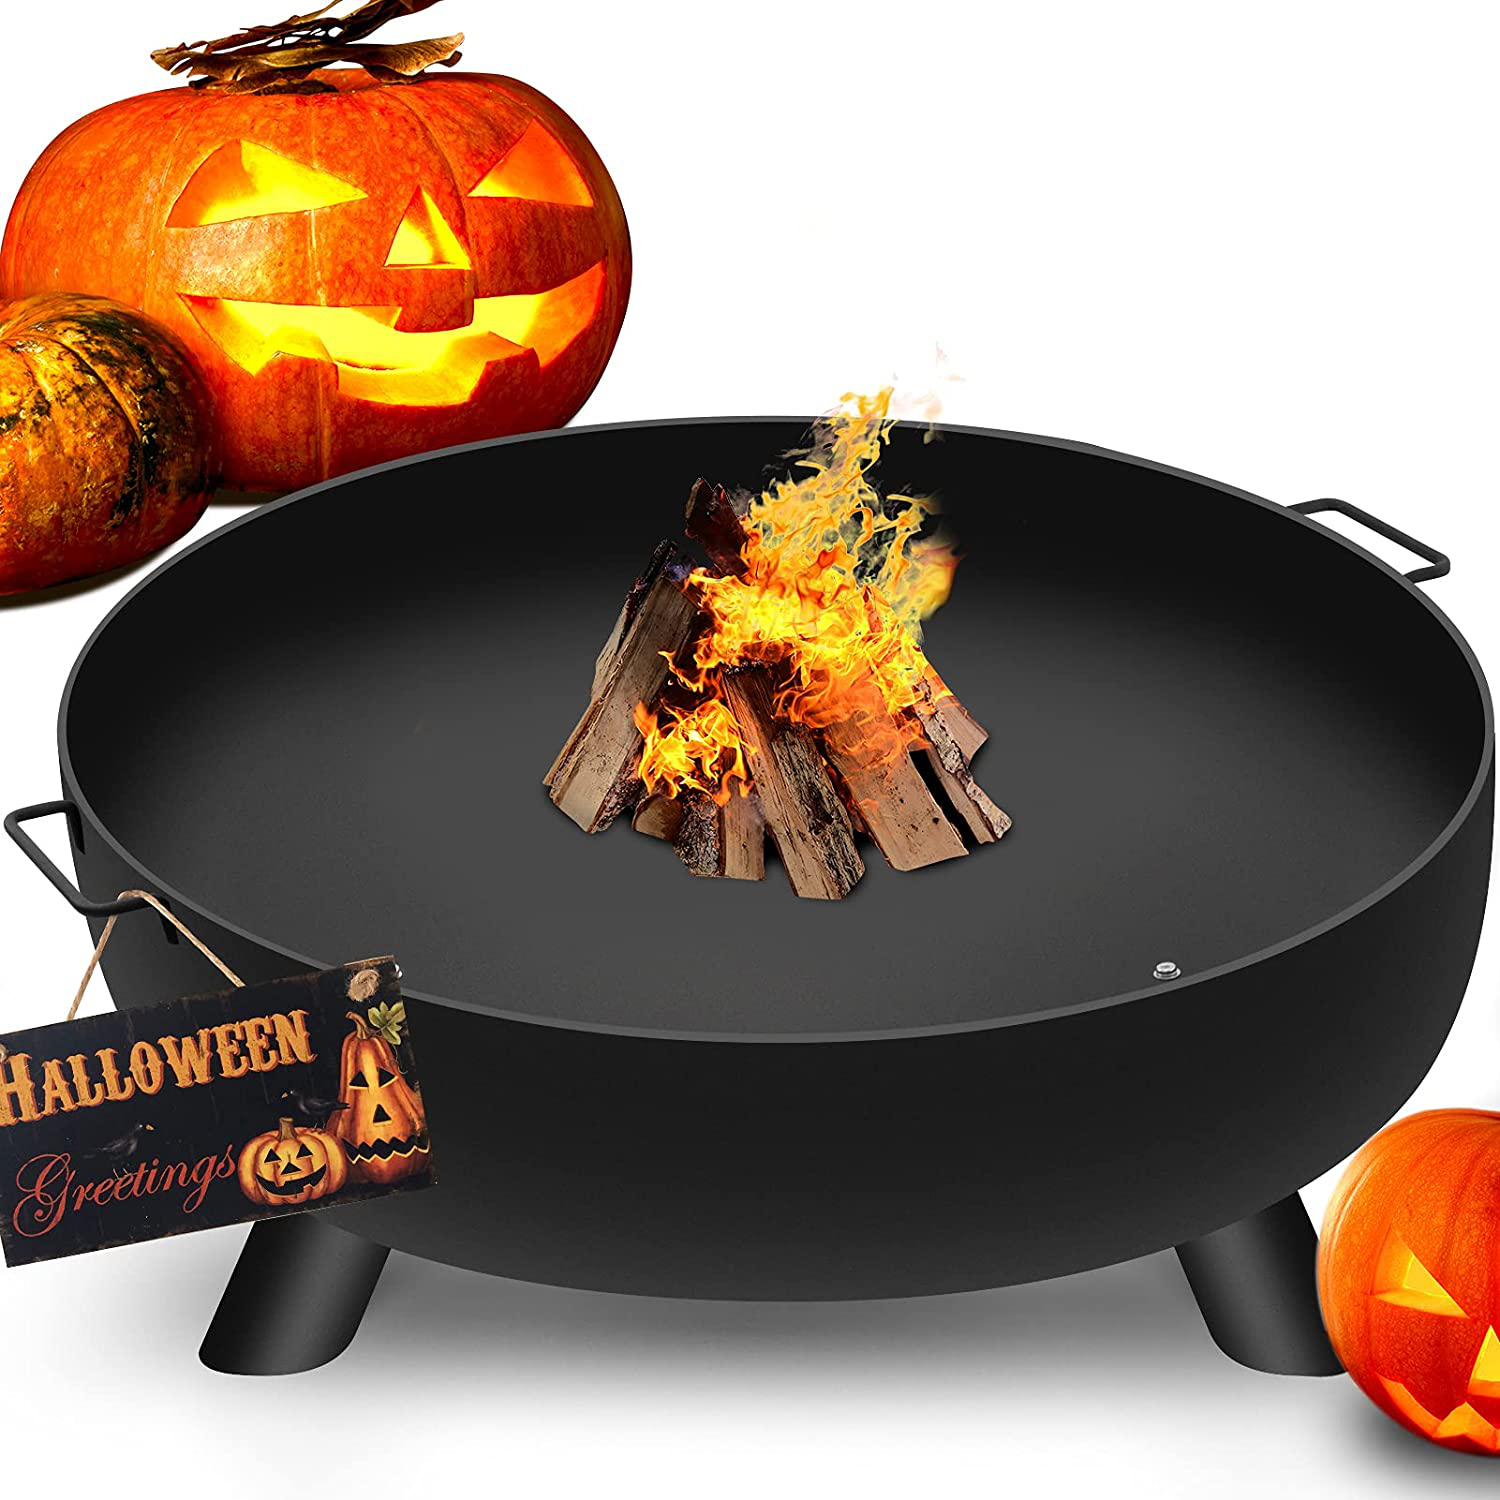 Amagabeli Fire Pit Outdoor Wood Burning Cast Iron Fire Bowl 39in with A Drain Hole Fireplace Extra Deep Large Round Outside Backyard Deck Camping Beach Heavy Duty Metal Grate Rustproof Black